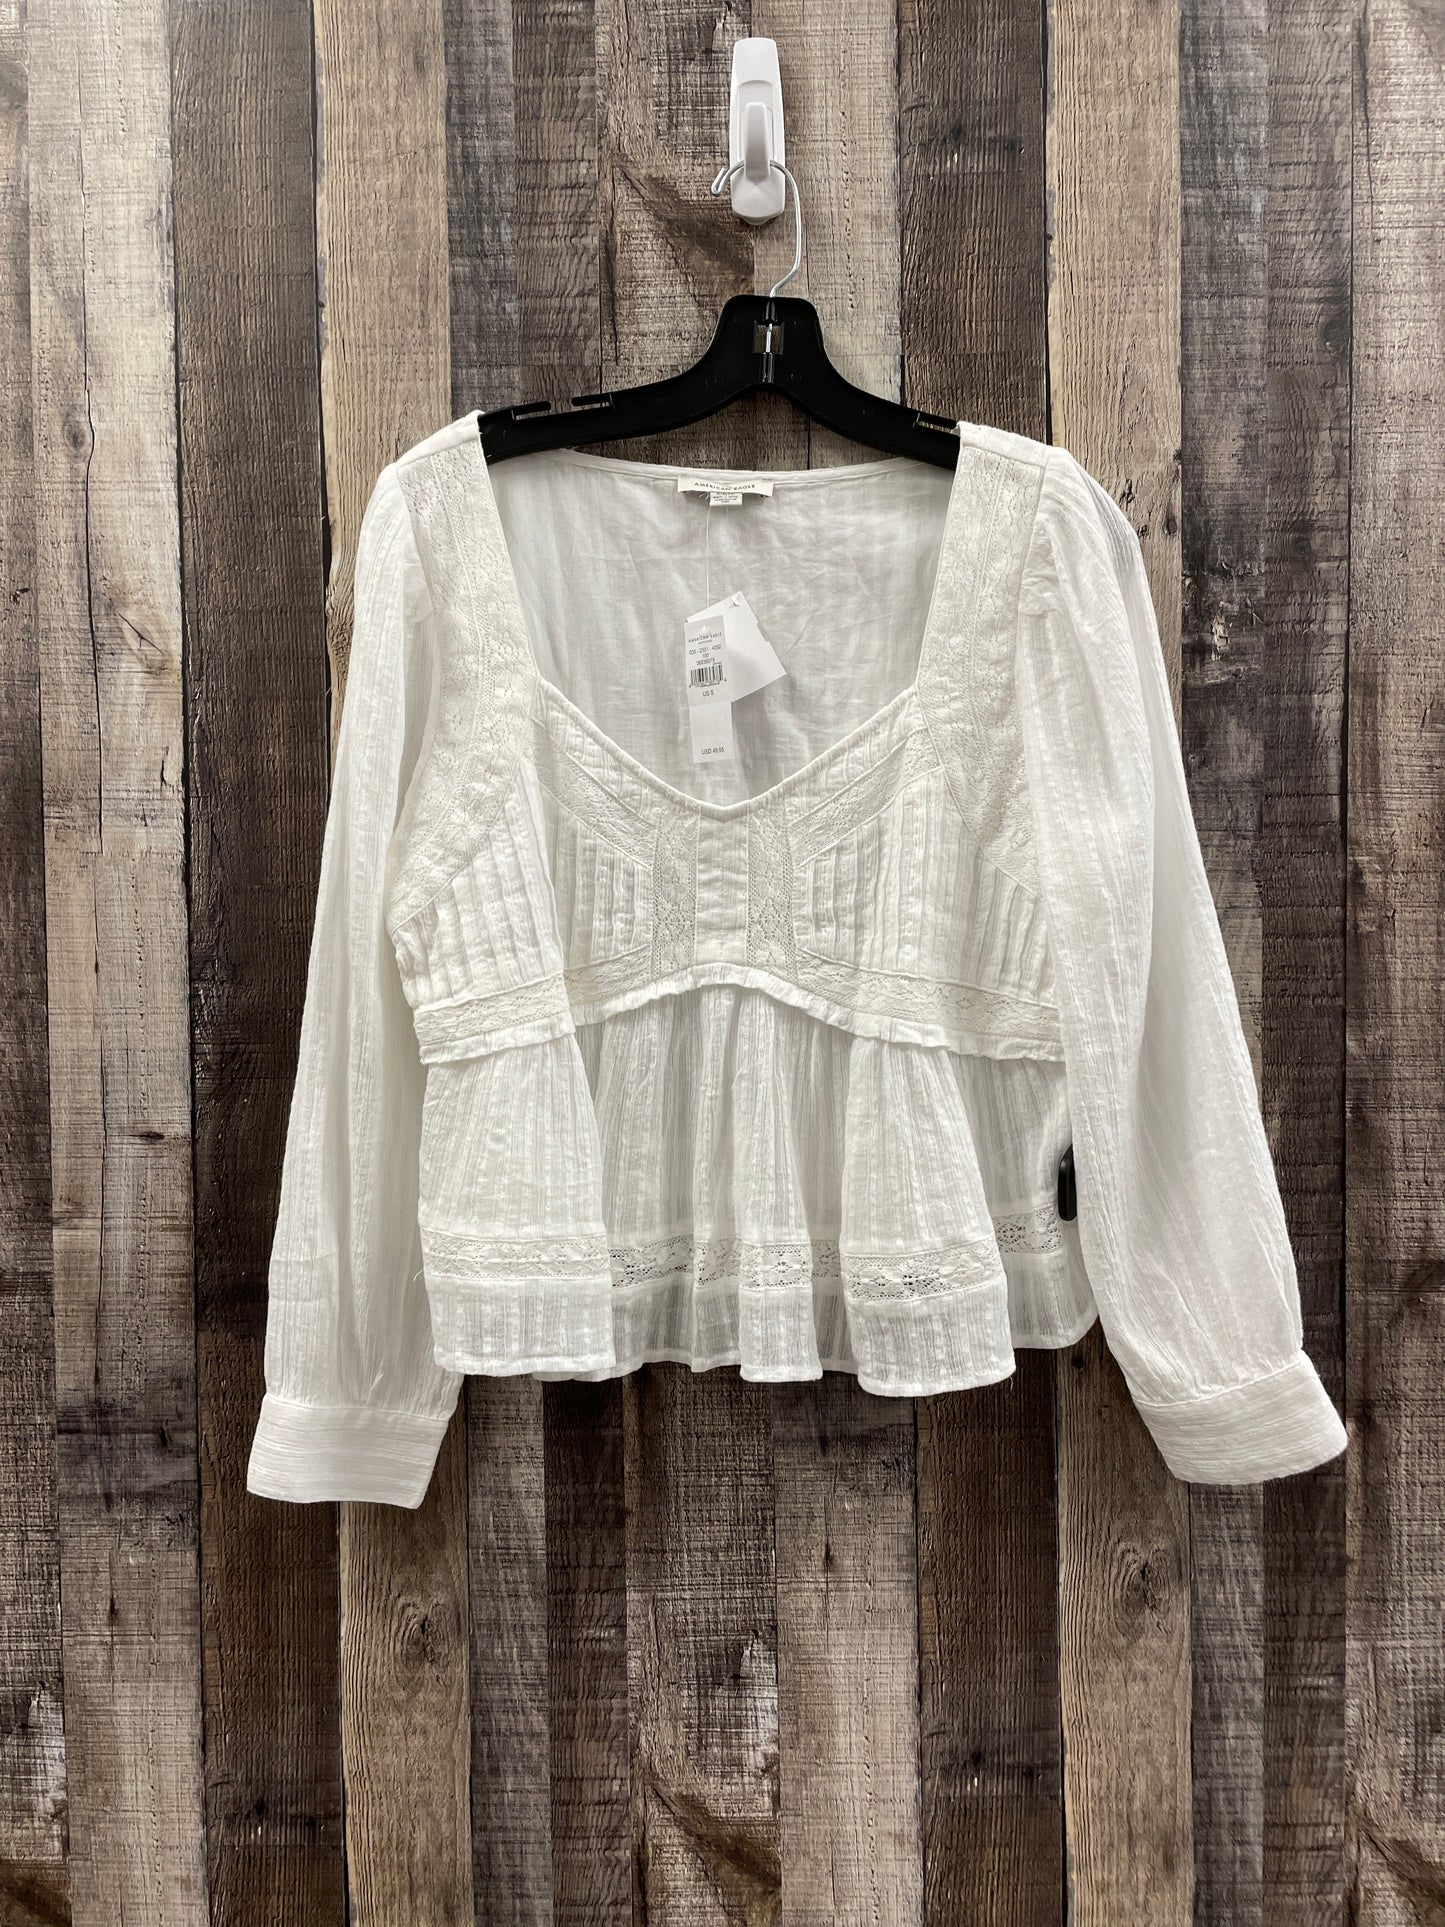 White Top Long Sleeve American Eagle, Size S